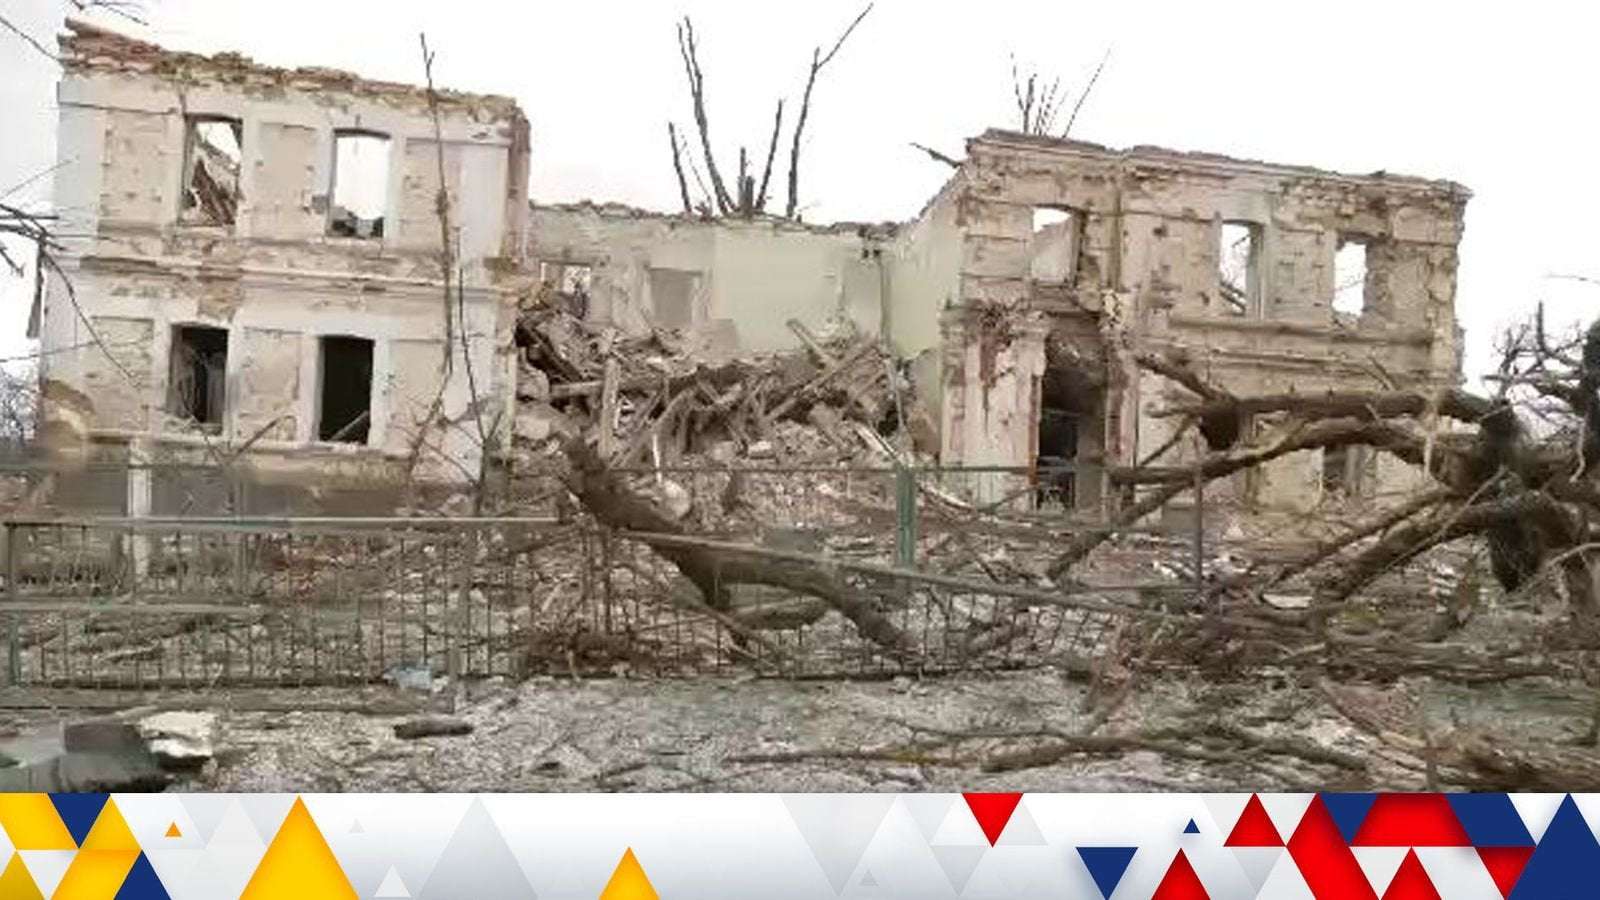 image for 'Mass burial site containing 440 graves' found in Izyum after city liberated by Ukrainian forces